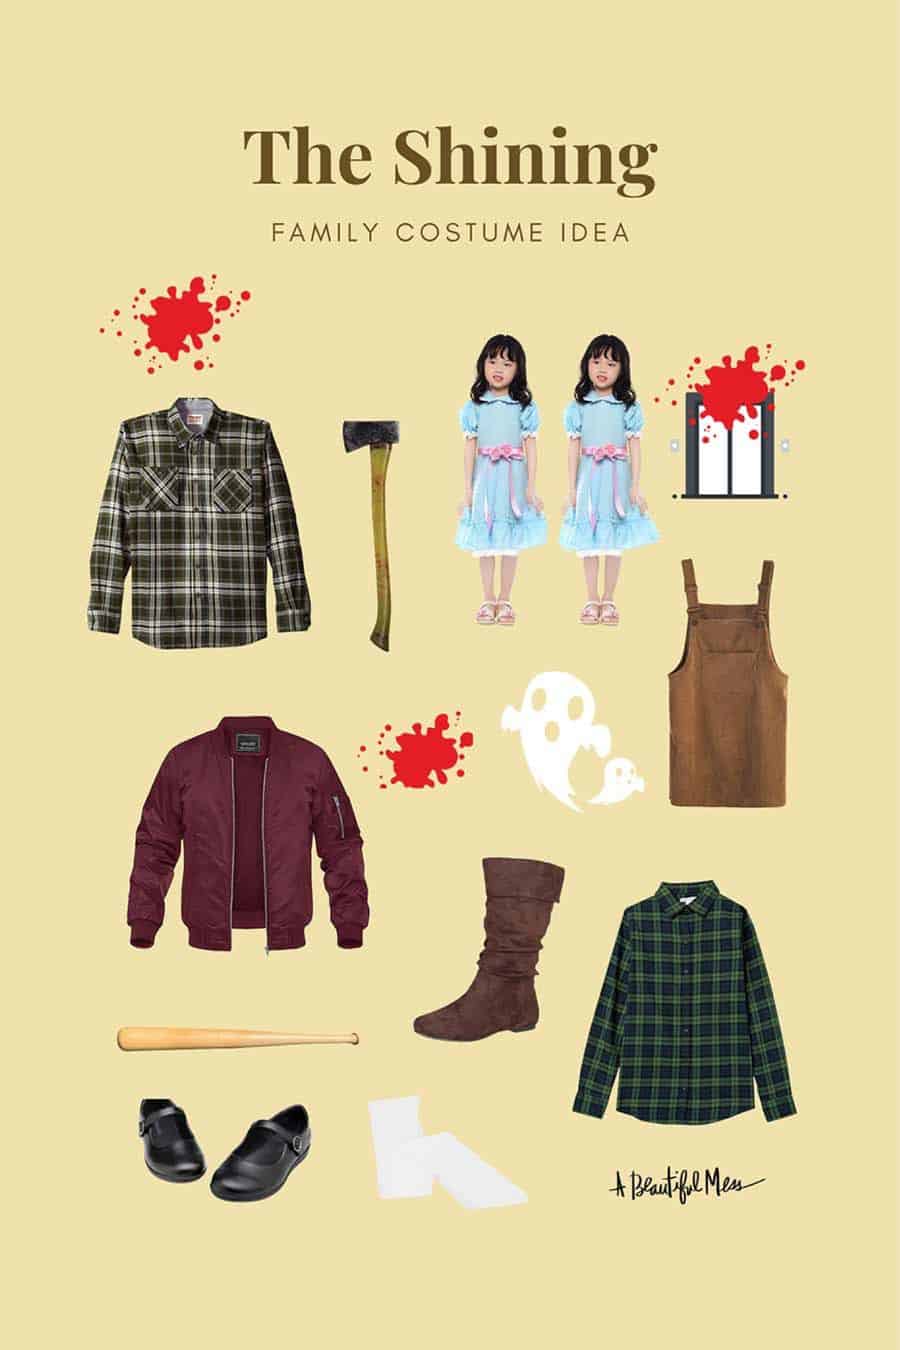 Family halloween costume ideas from The Shining movie